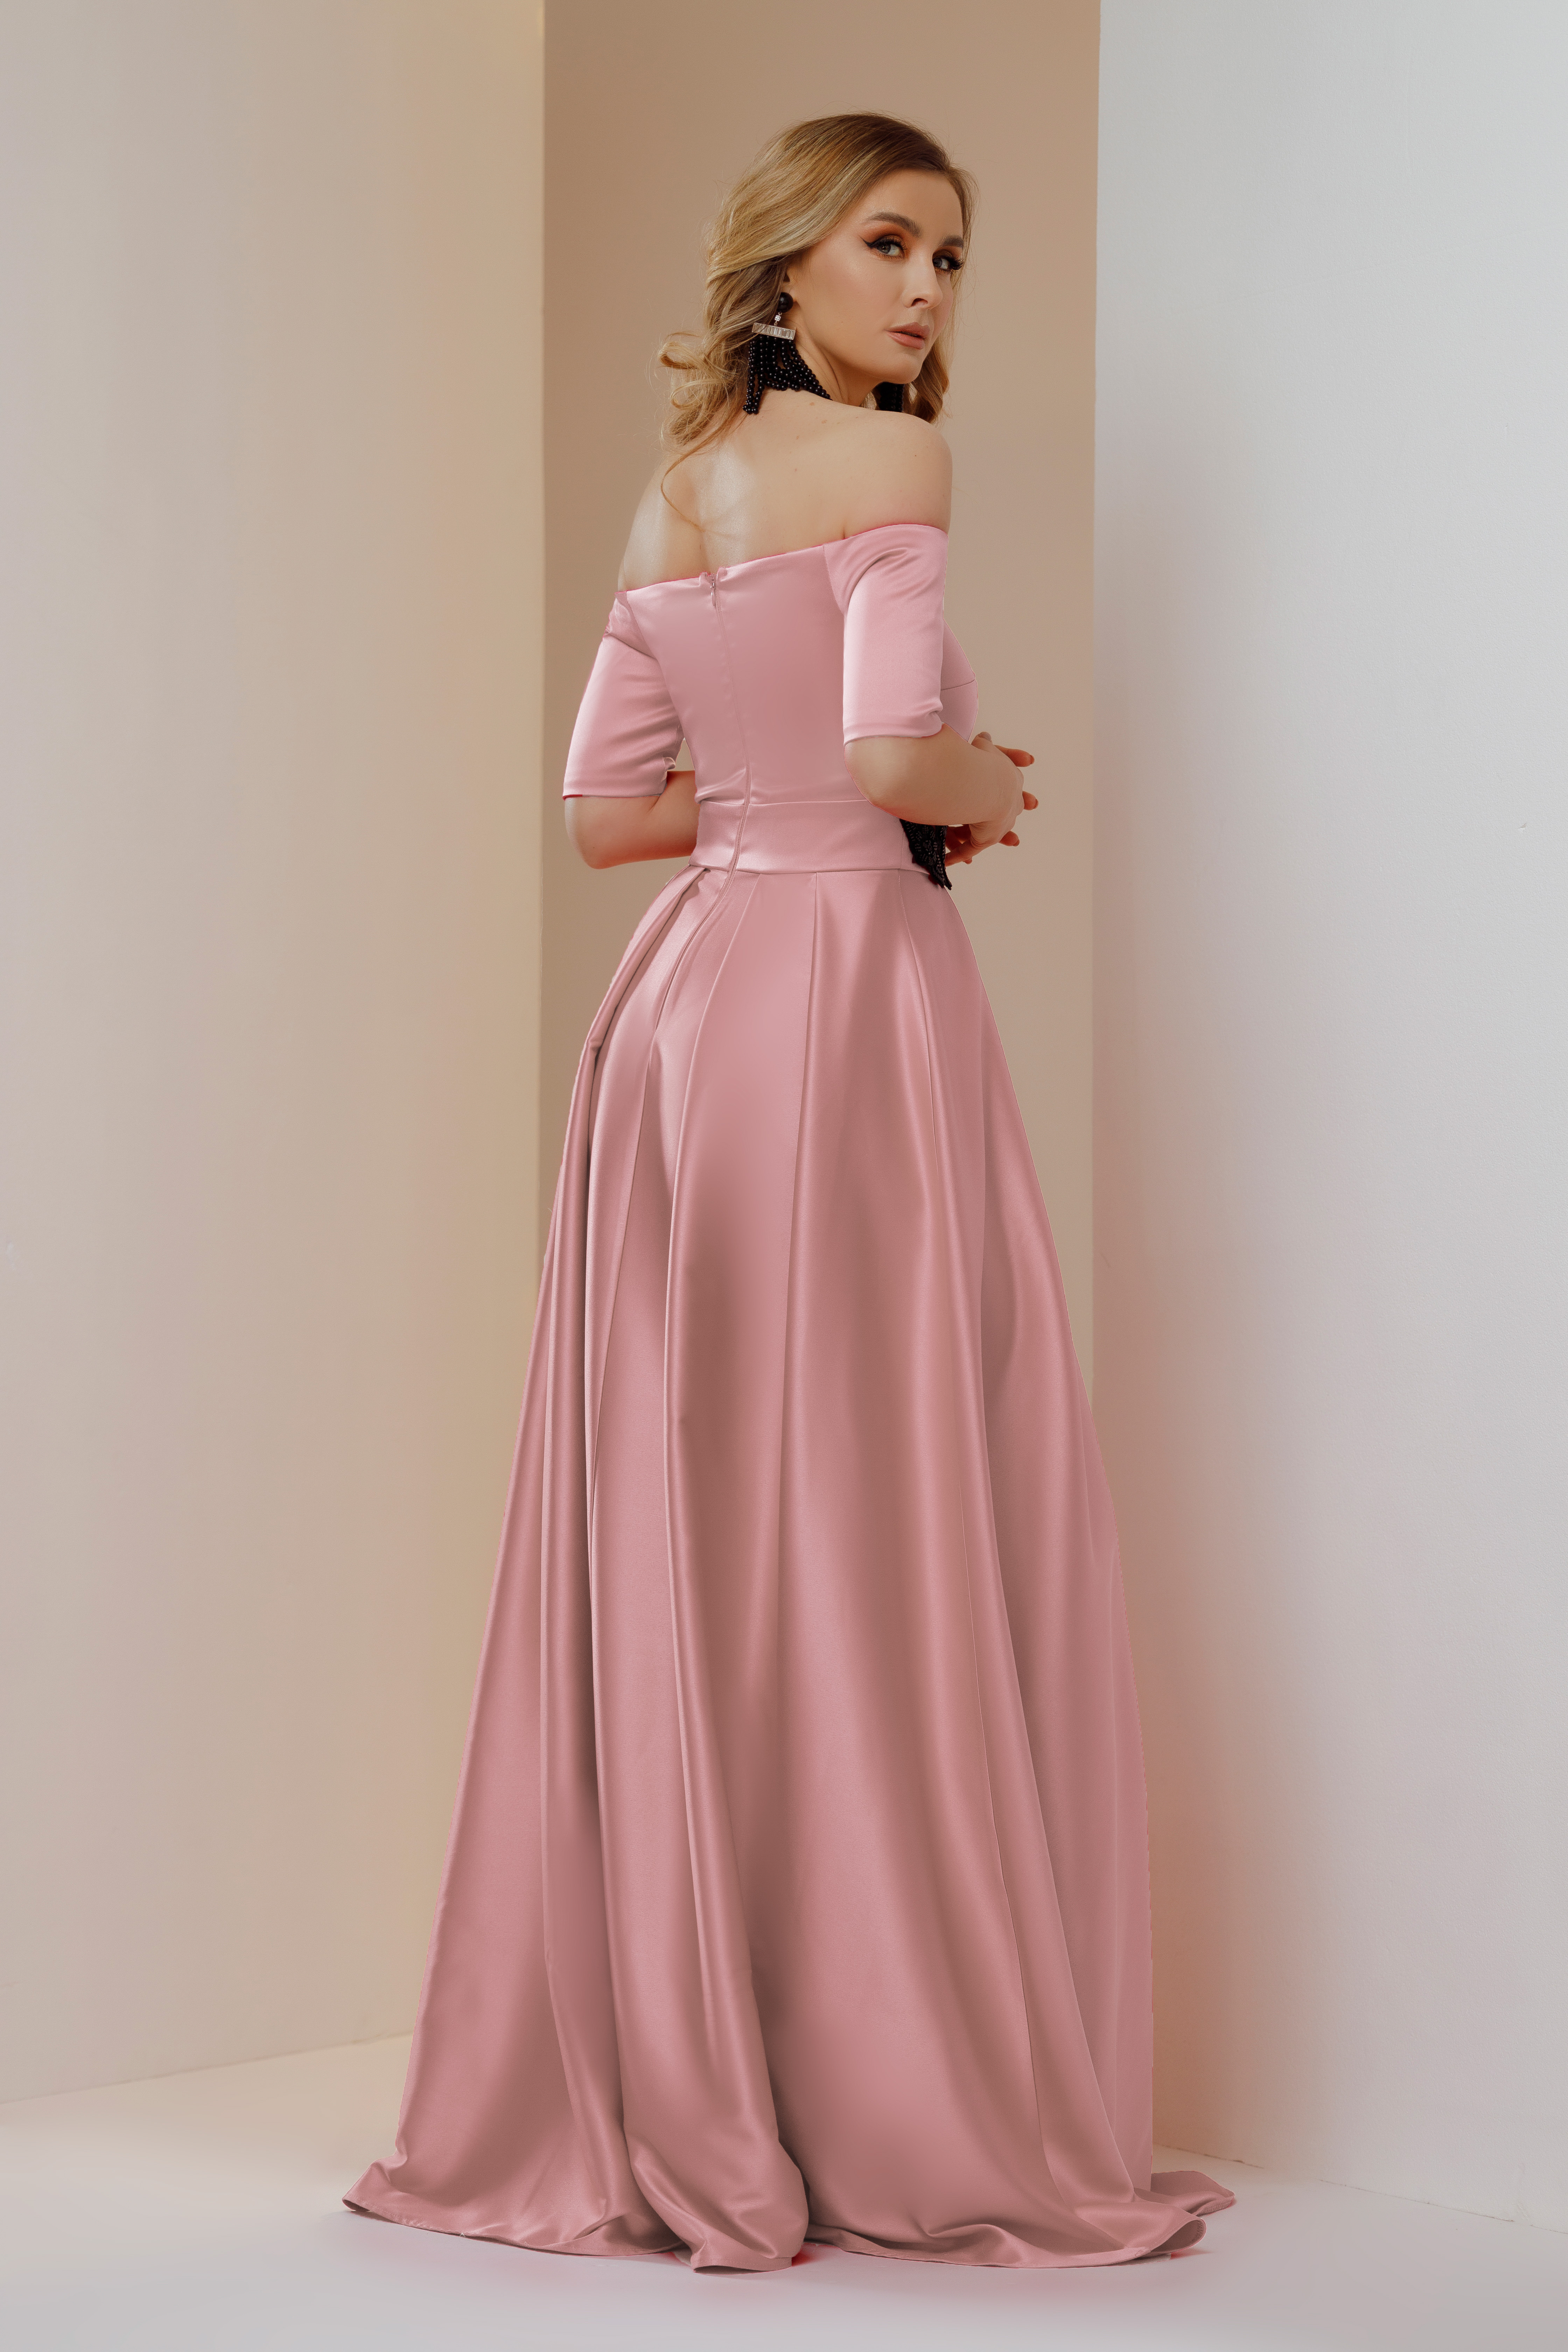 Powder Pink Satin Long Dress in A-line with Bare Shoulders and Embroidery at the Waist - Artista 2 - StarShinerS.com